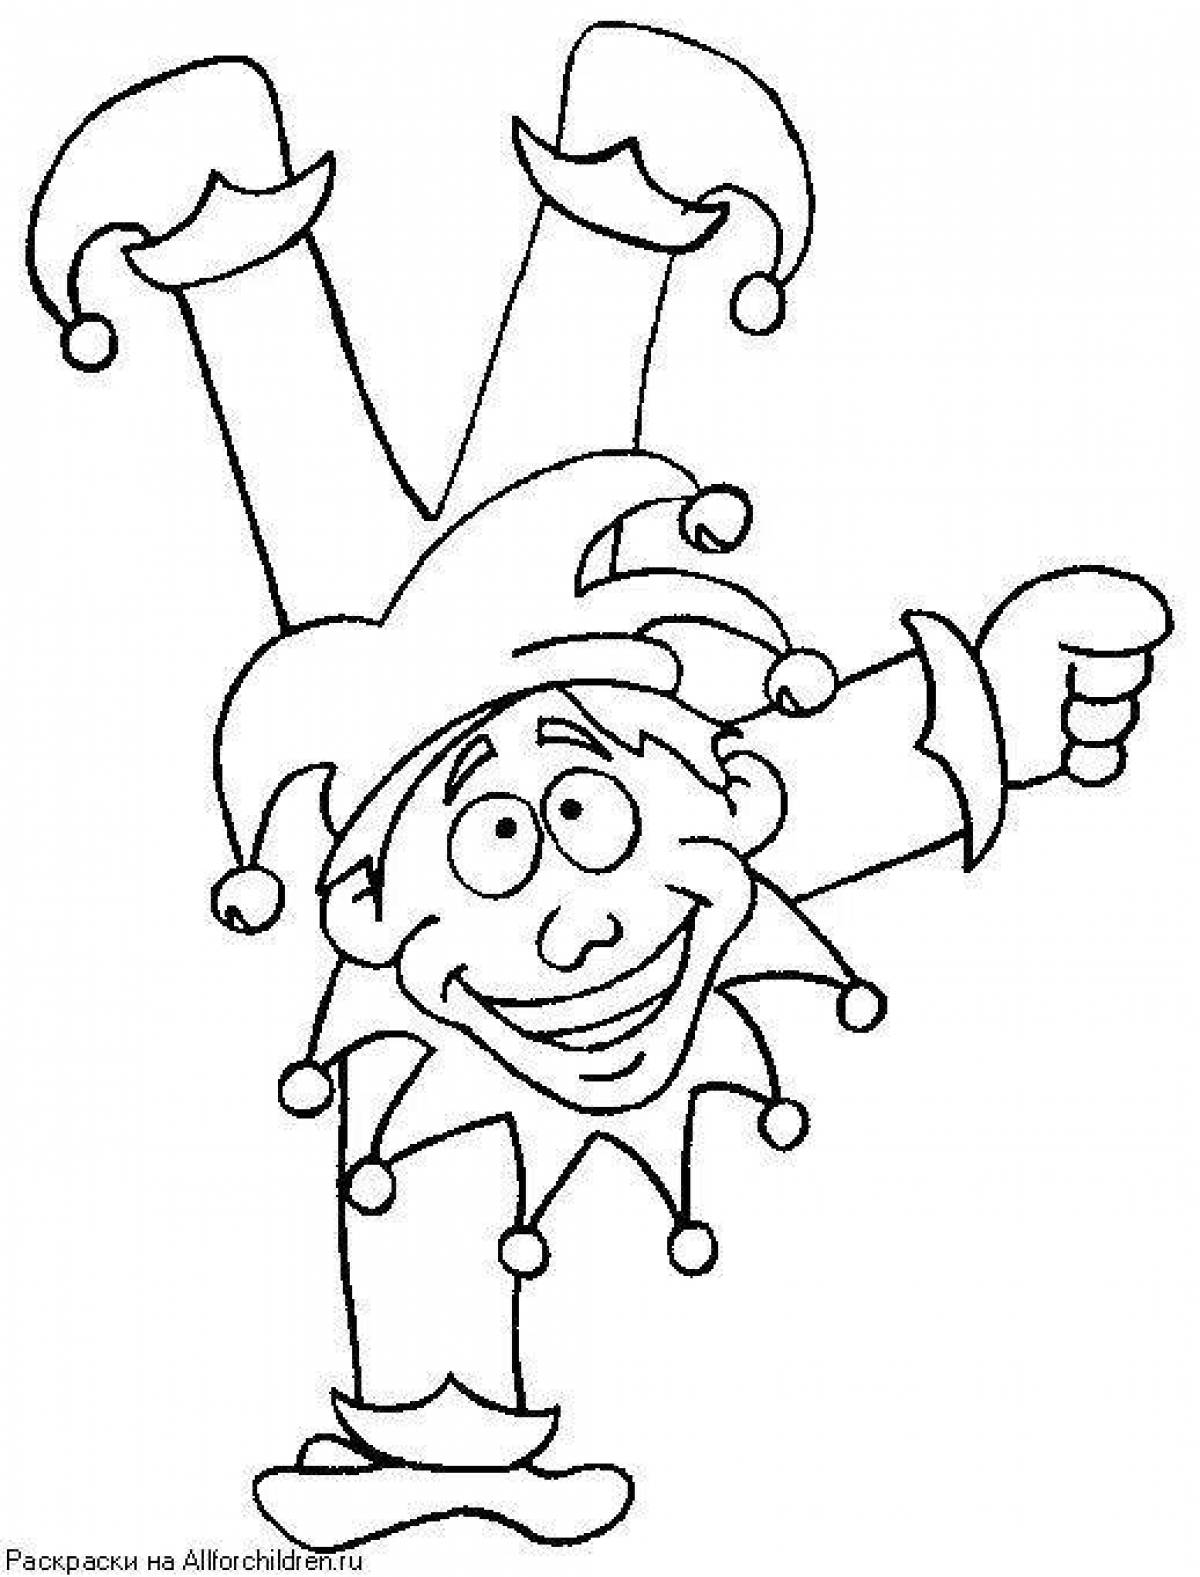 Amazing jester coloring page